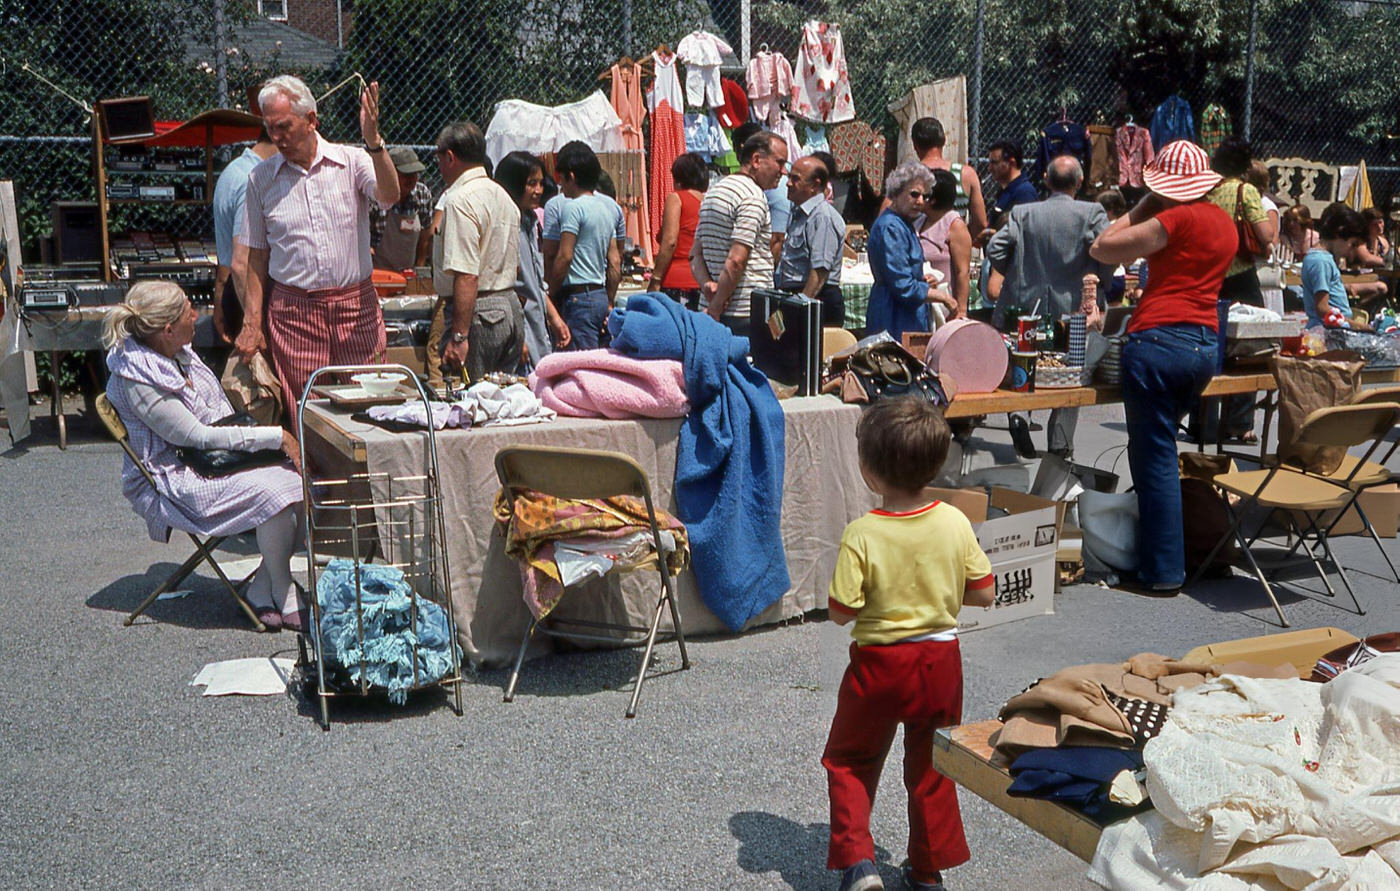 A Child Approaching A Vendor'S Table At An Outdoor Flea Market On Woodhaven Boulevard In Rego Park, Queens, 1970S.